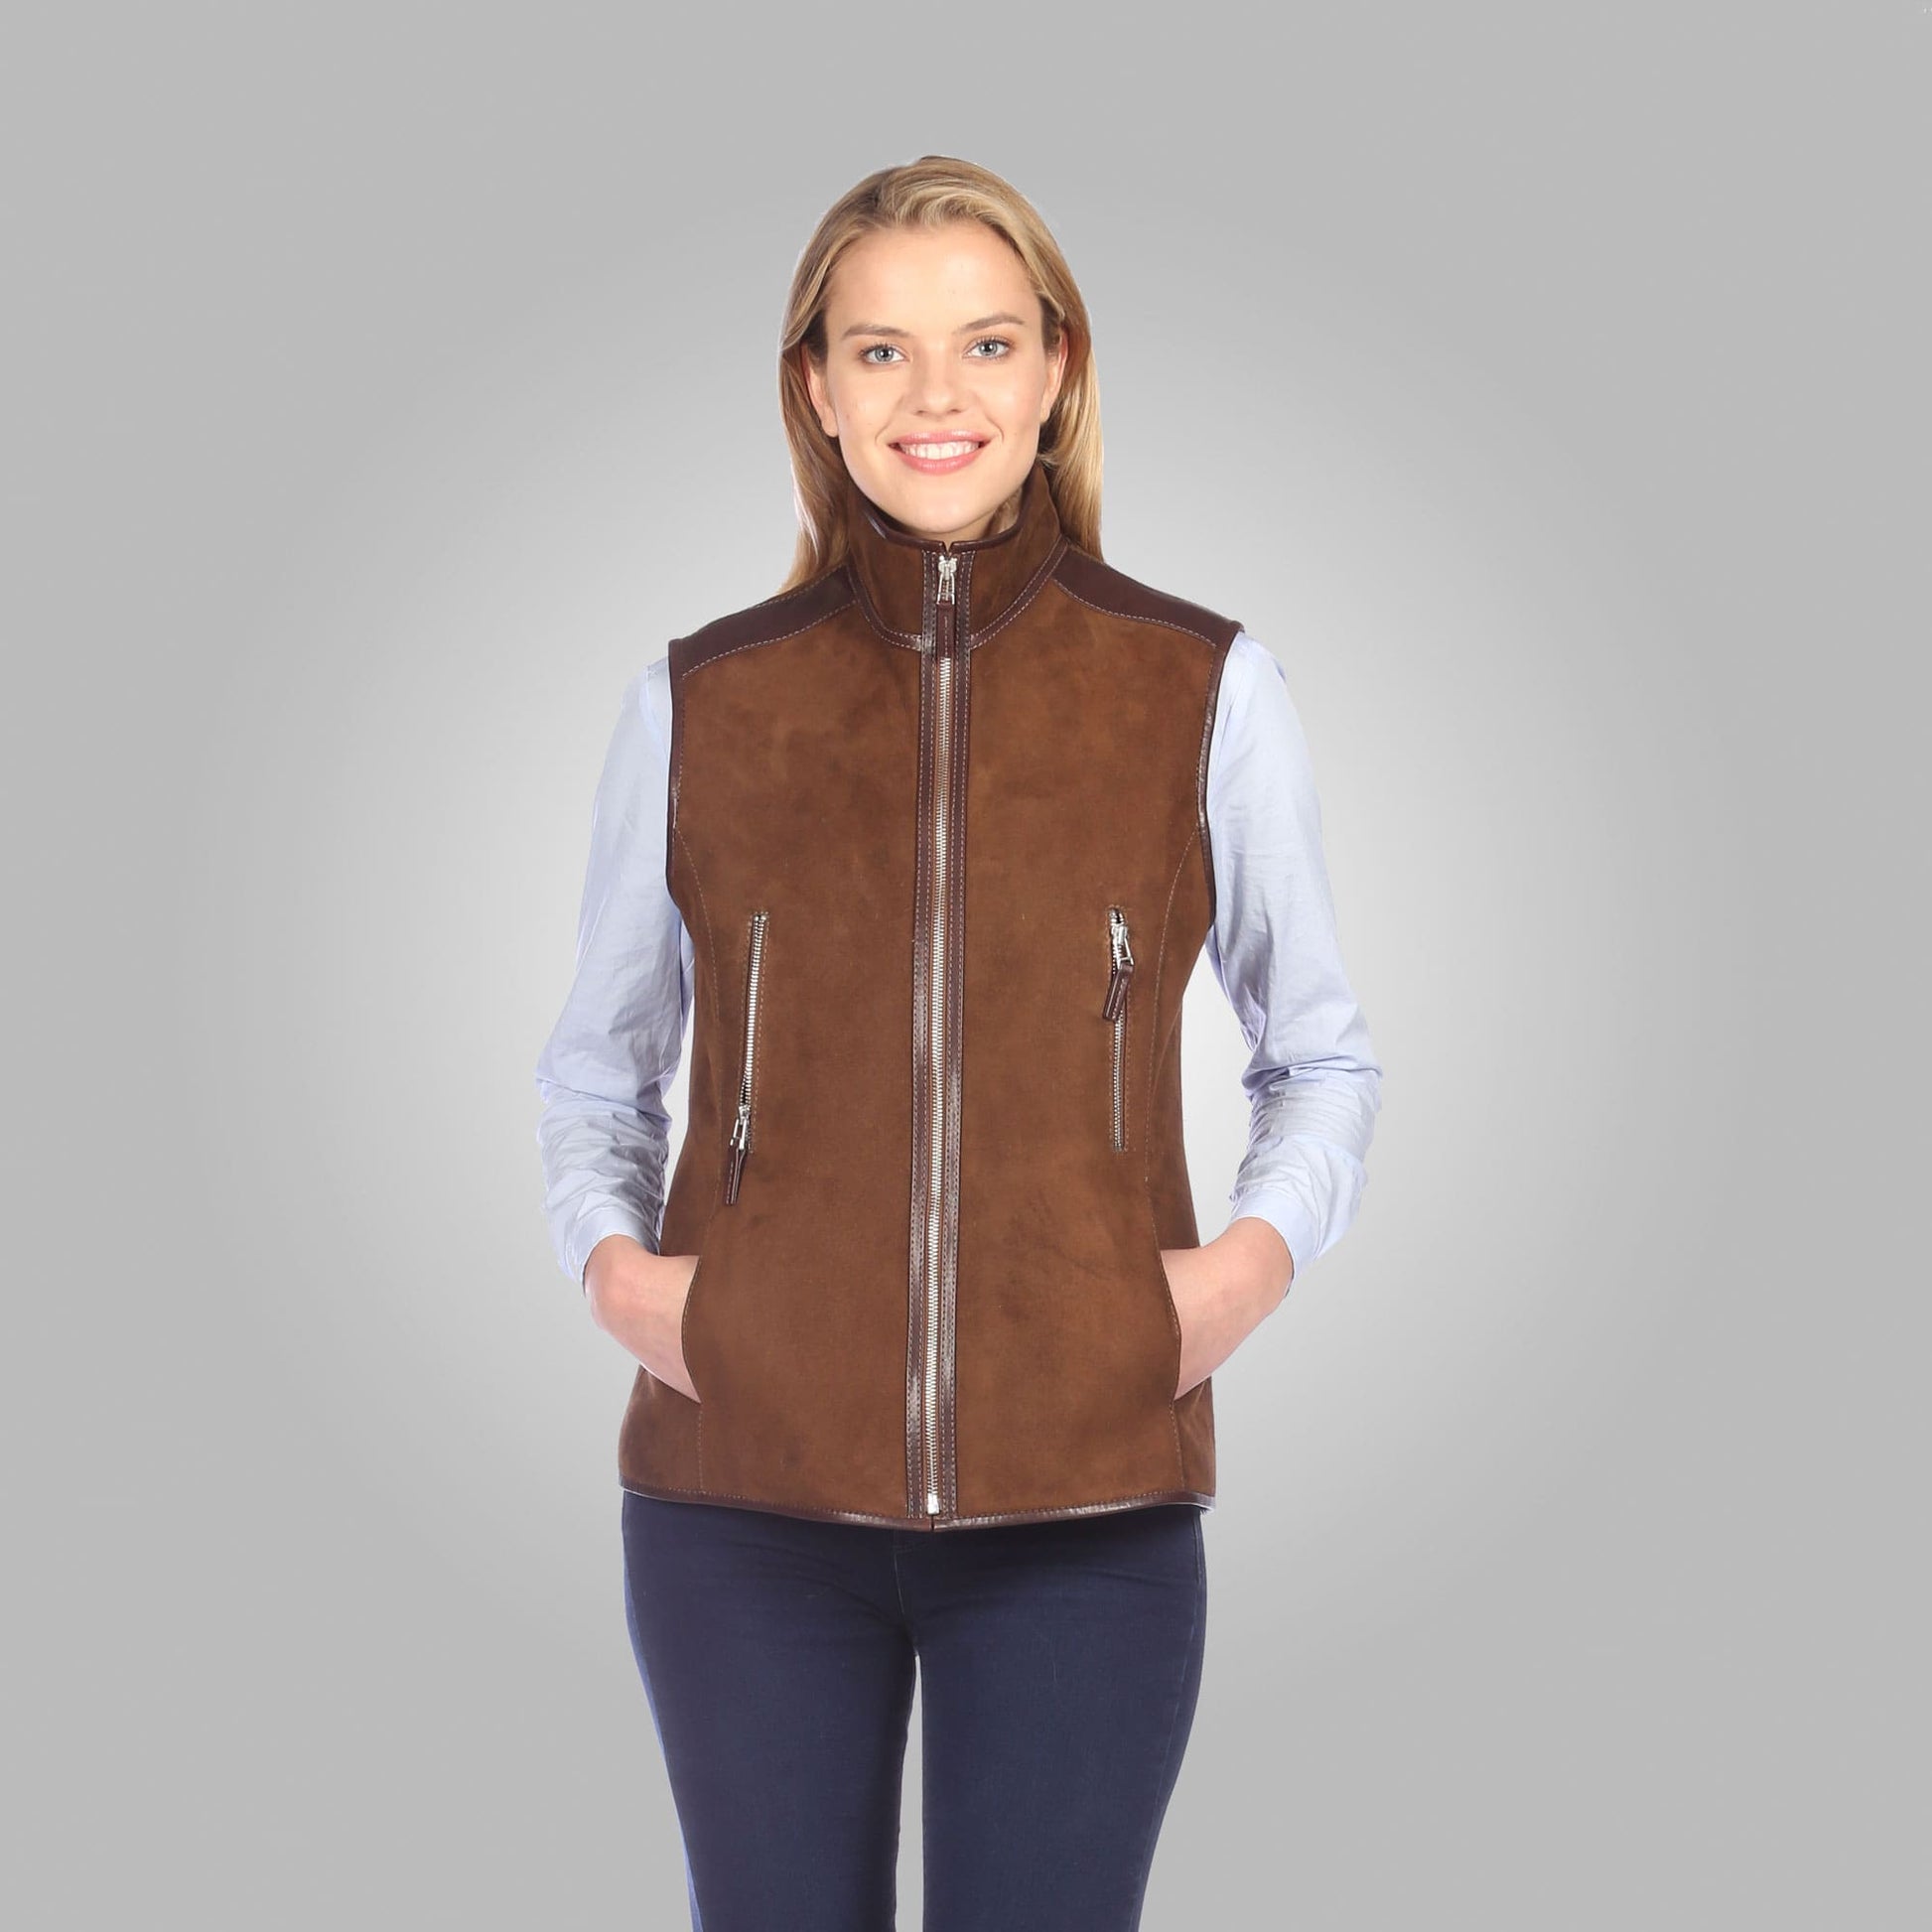 Women's Suede Leather Shearling Vest In Chocolate Brown